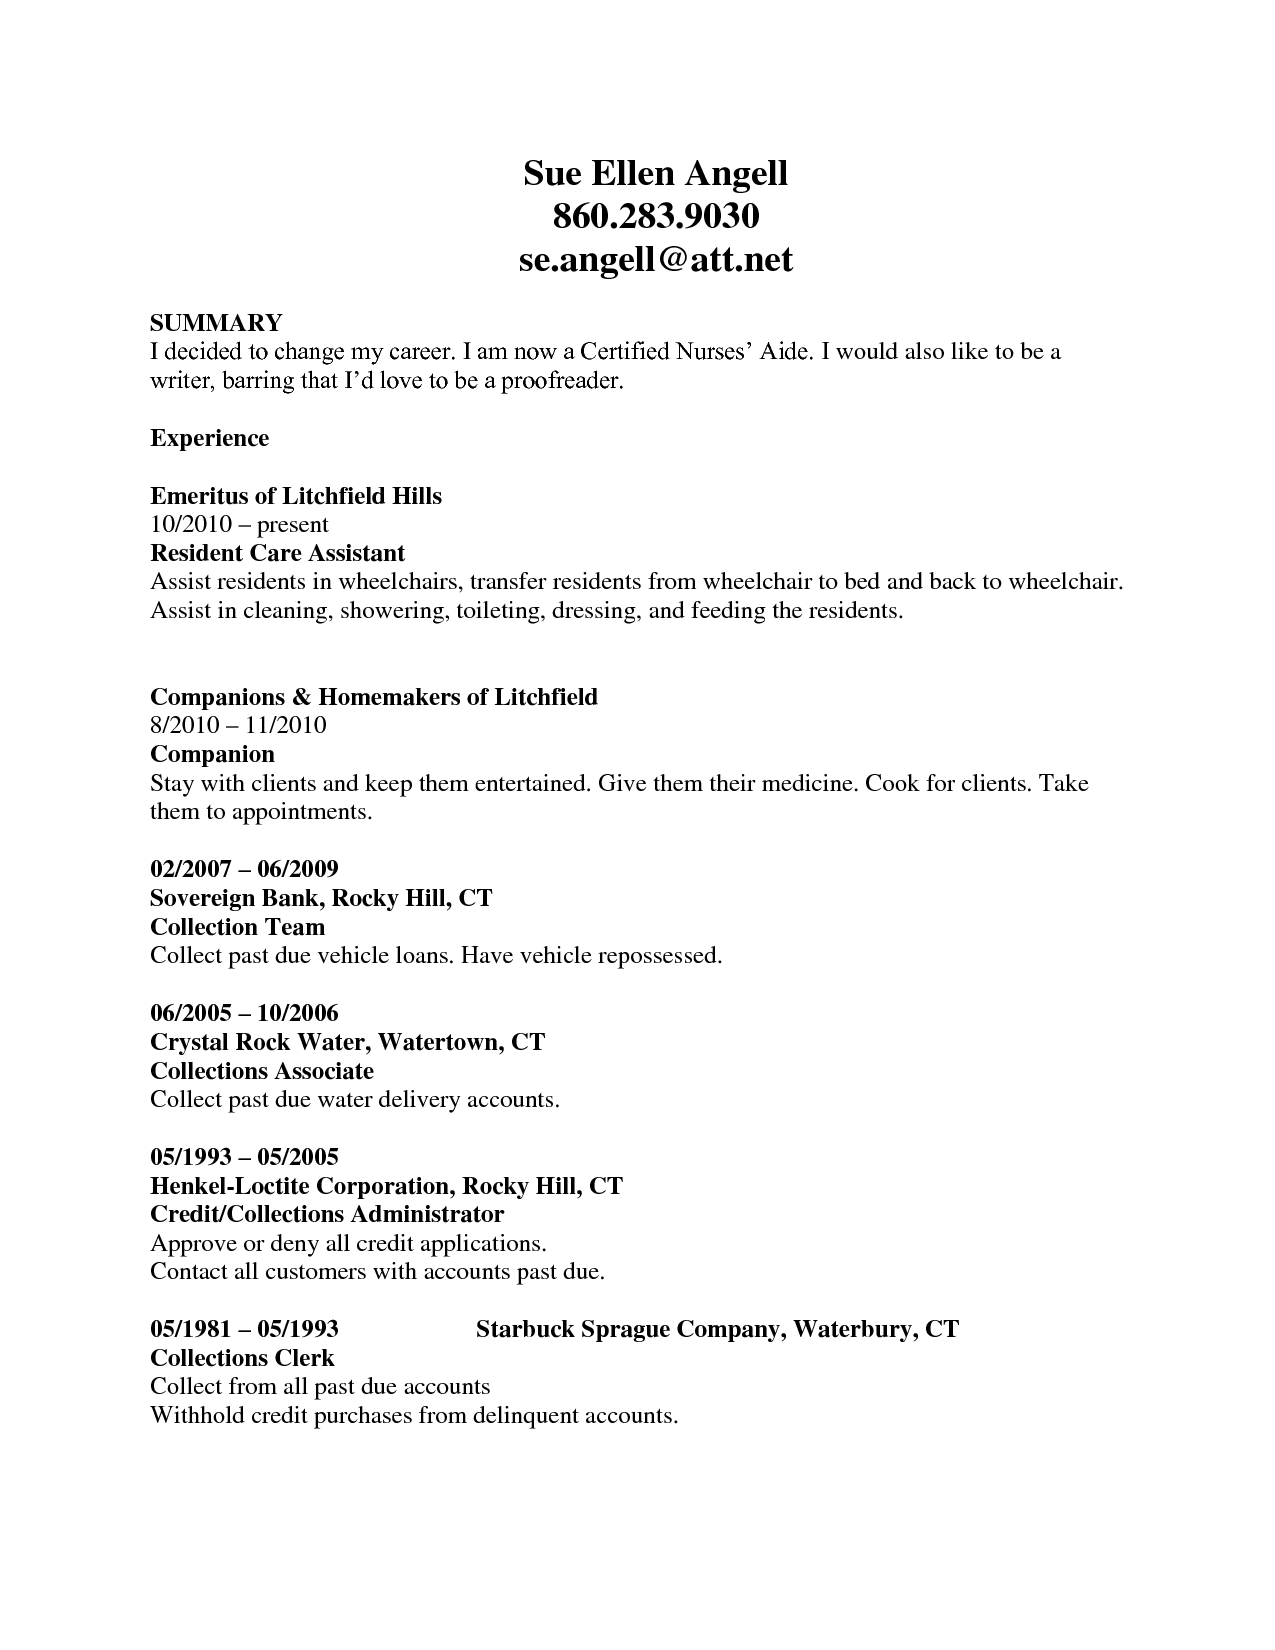 Resume Profile Examples  Writing A Winning Cna Resume Examples And Skills For Cnas